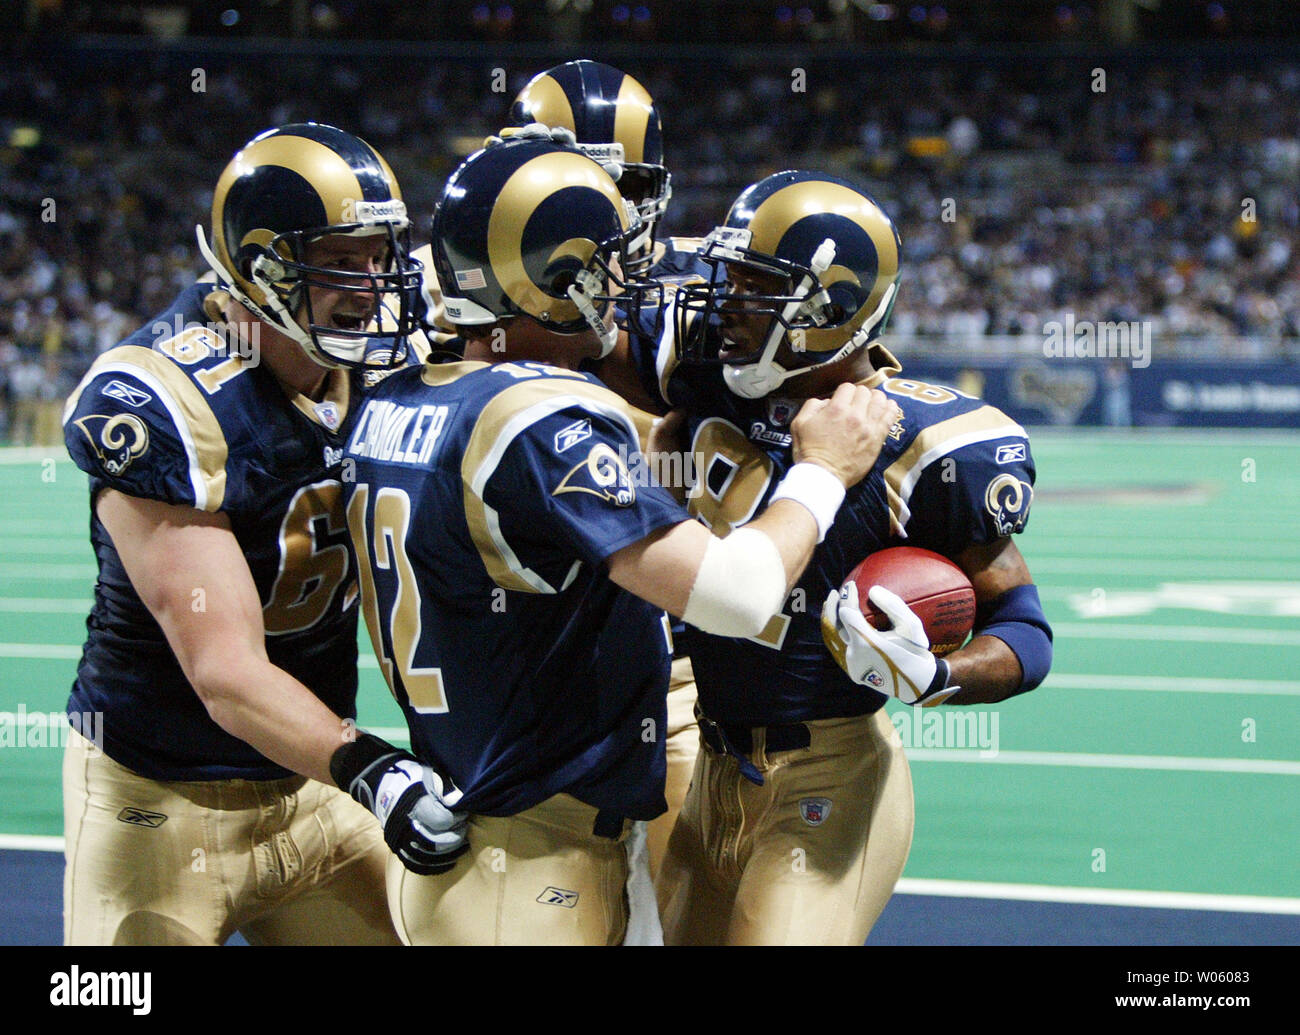 St. Louis Rams quarterback Chris Chandler (12) and Tom Nutten (61) congratulate Torry Holt (R) after Holt caught a pass for a touchdown in the second quarter against the San Francisco 49er's at the Edward Jones Dome in St. Louis on December 5, 2004. (UPI Photo/Bill Greenblatt) Stock Photo